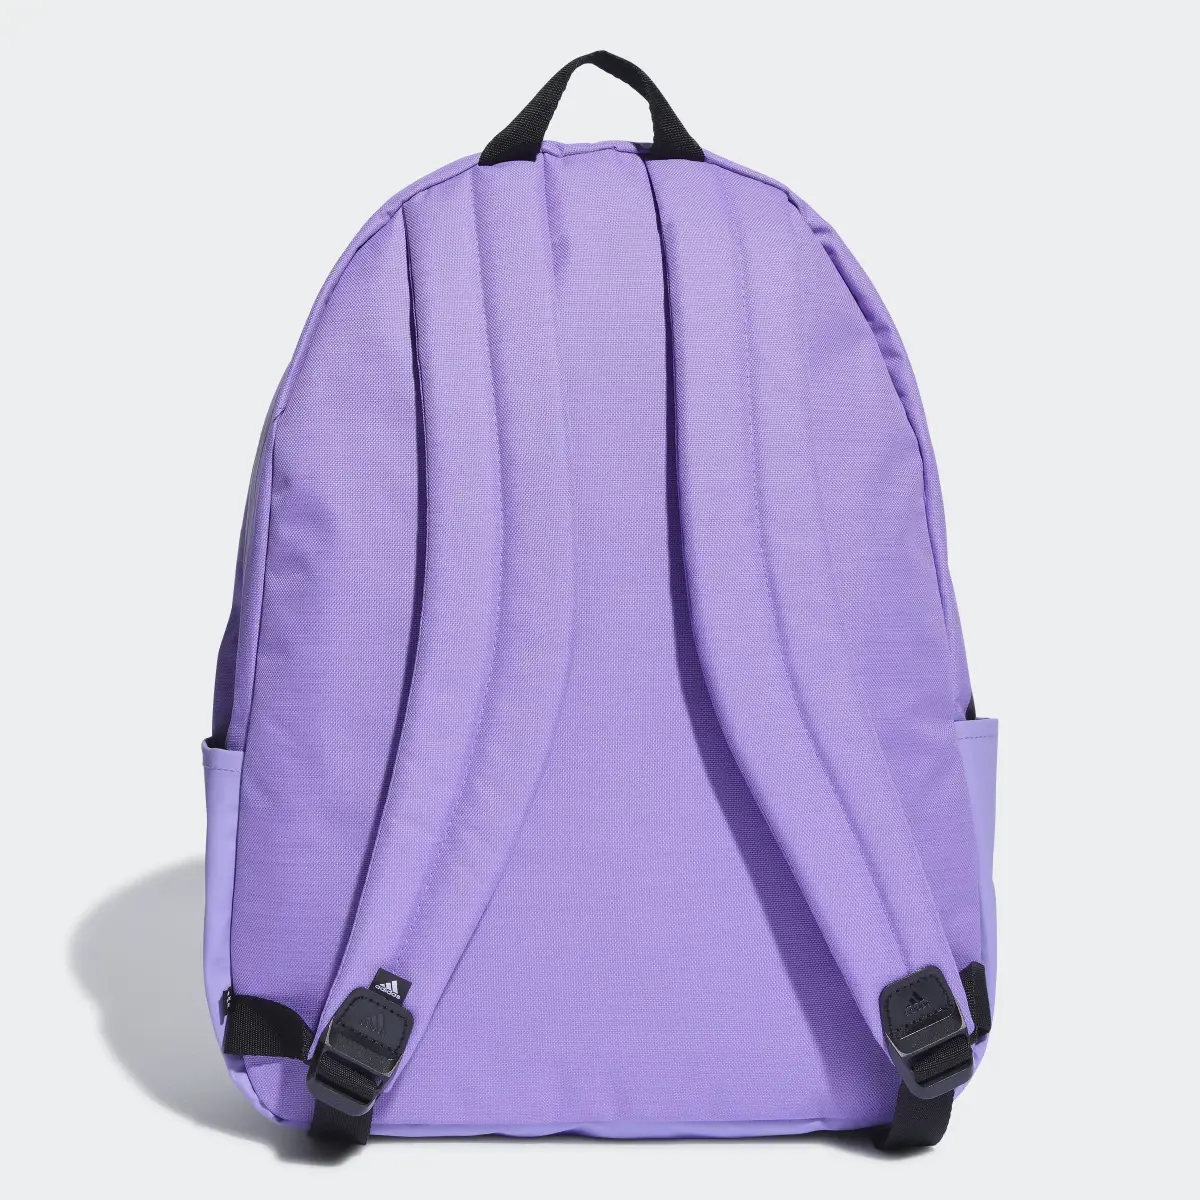 Adidas Classic 3-Stripes Backpack. 3